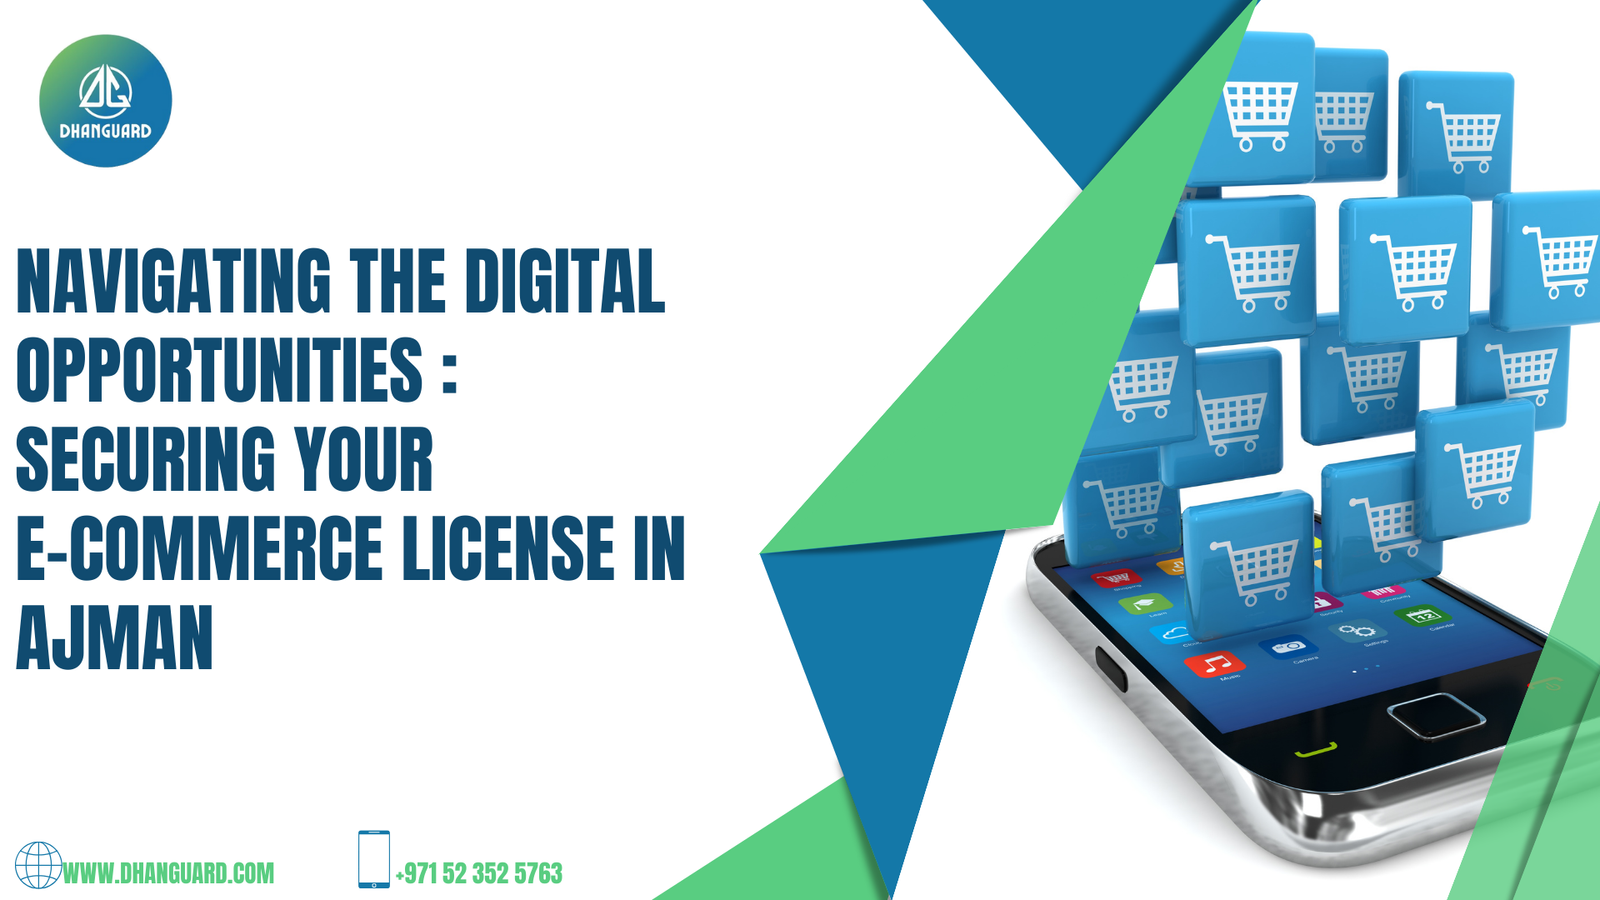 Getting E Commerce License in AJMAN Simplified! Read now and Get Yours.